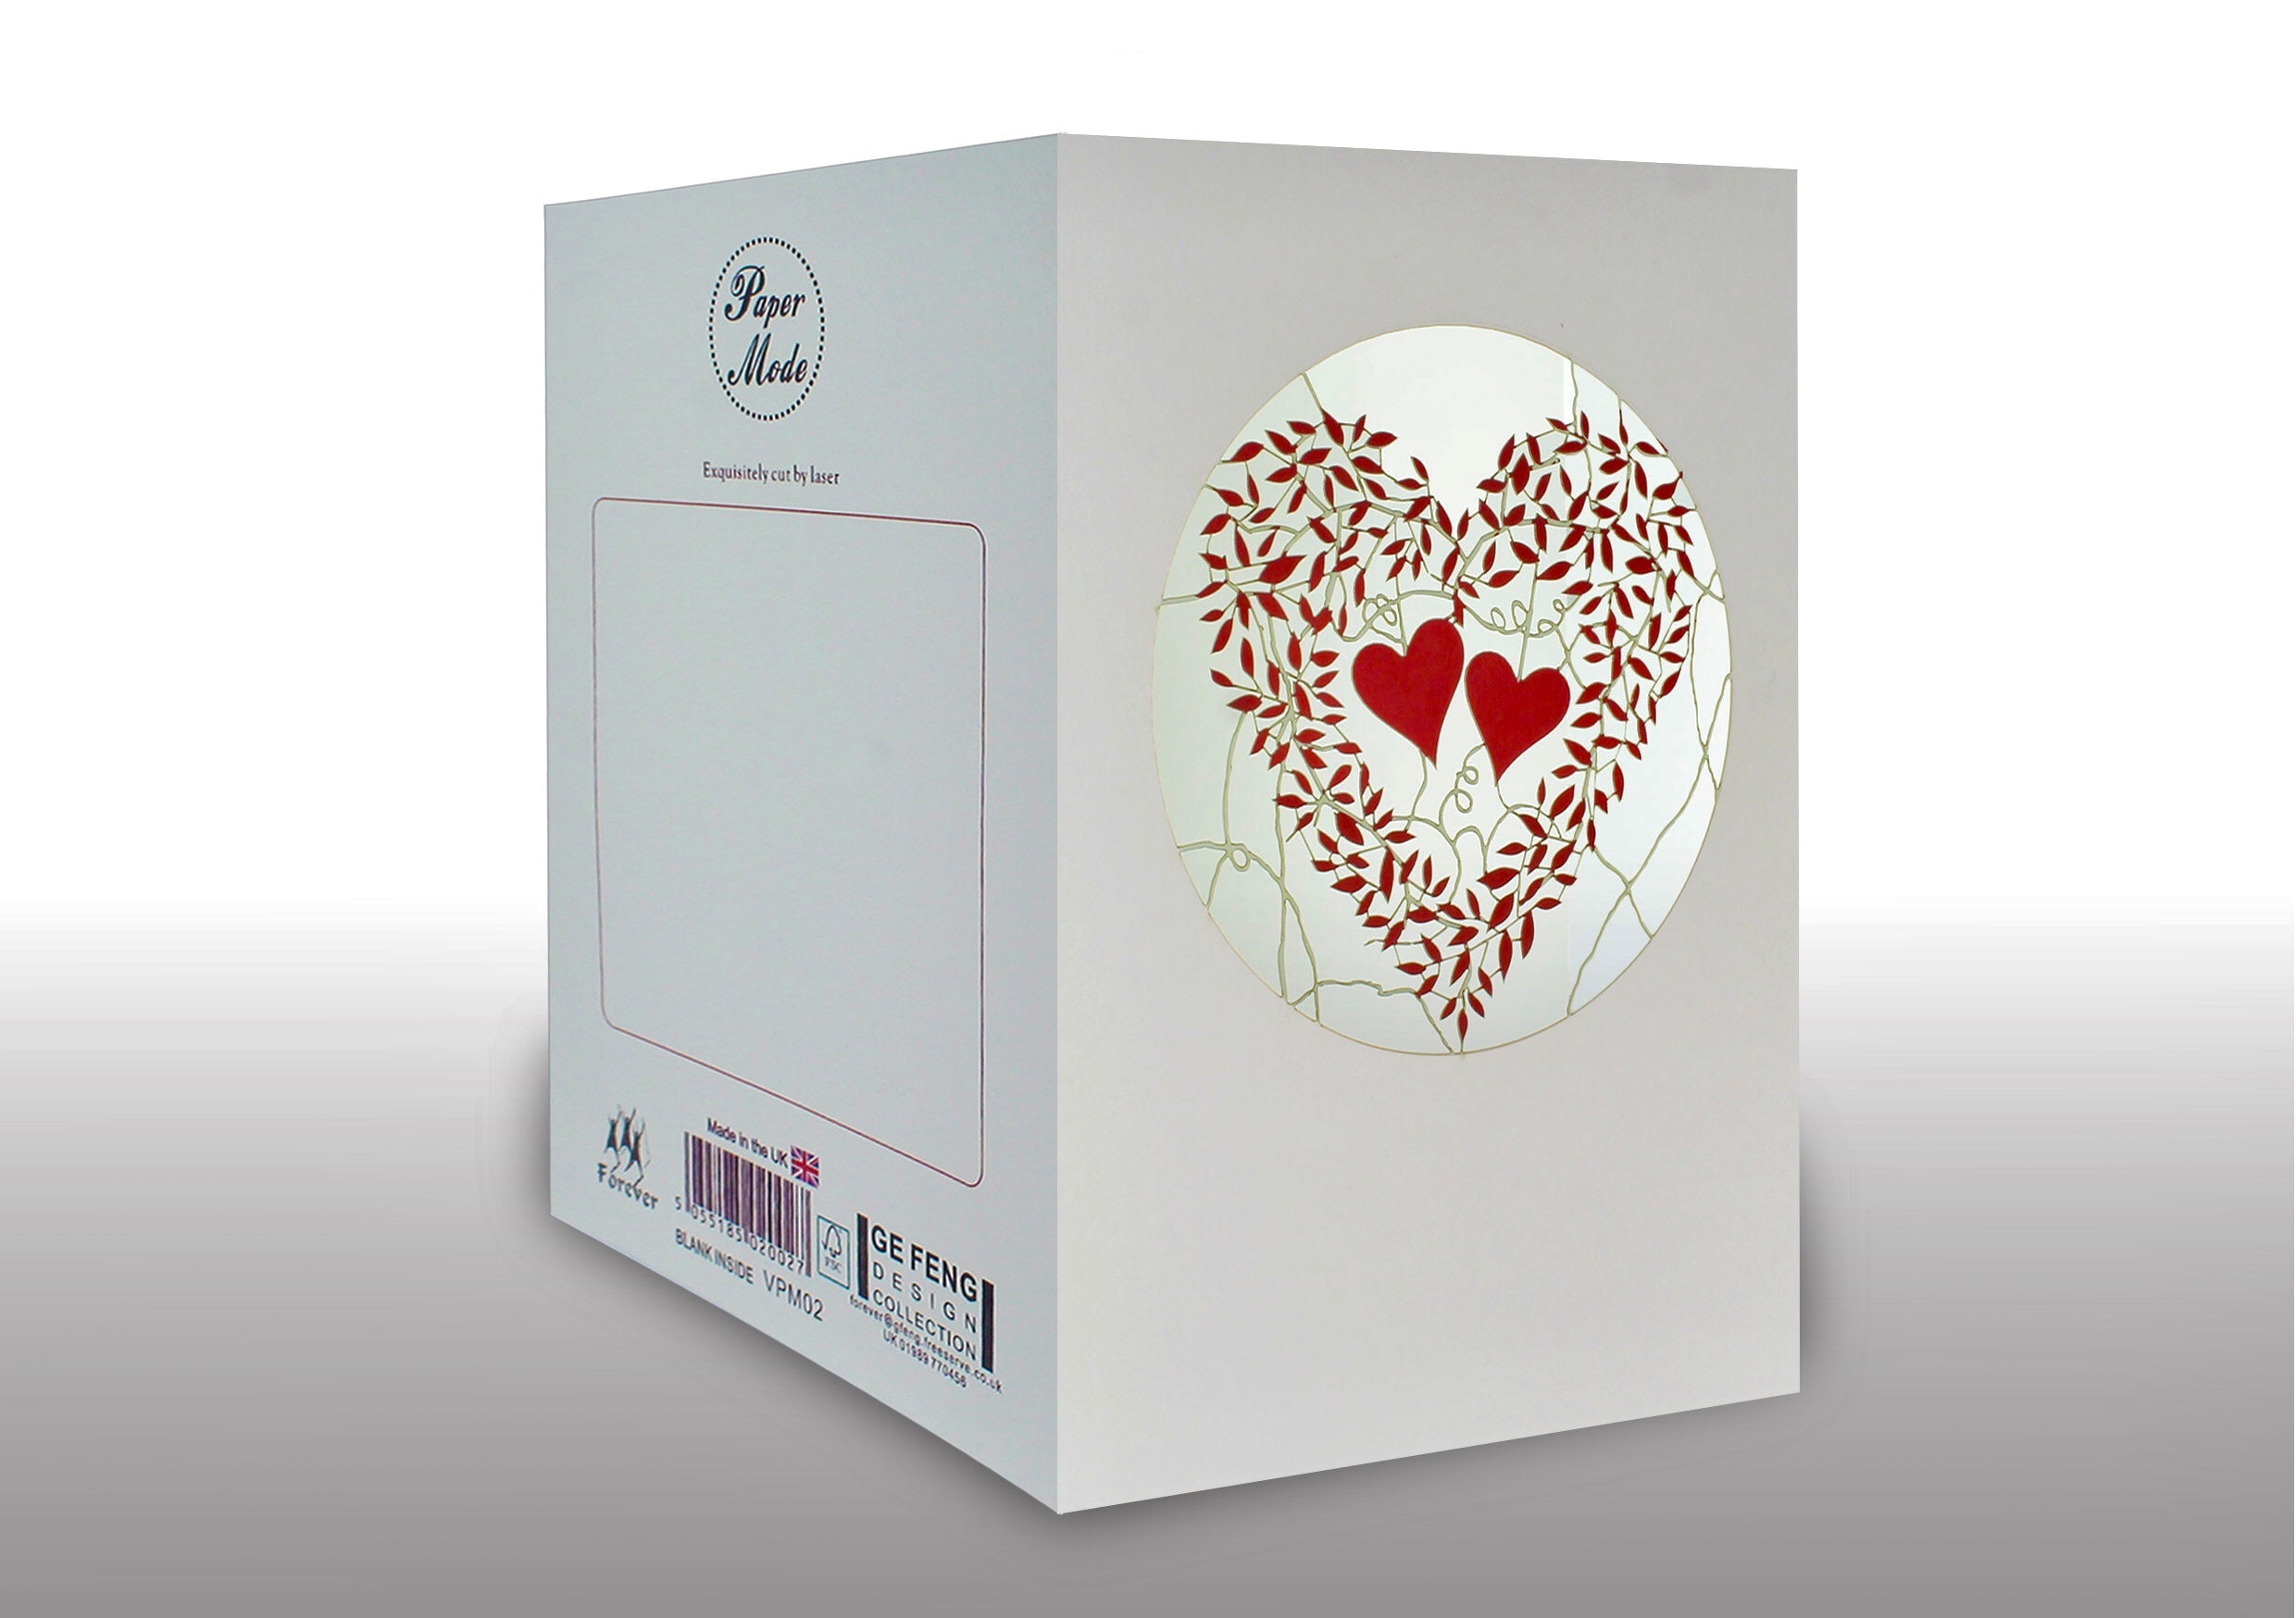 Valentines Two Hearts 3D Cut Out Anniversary Wedding Birthday Greeting Card